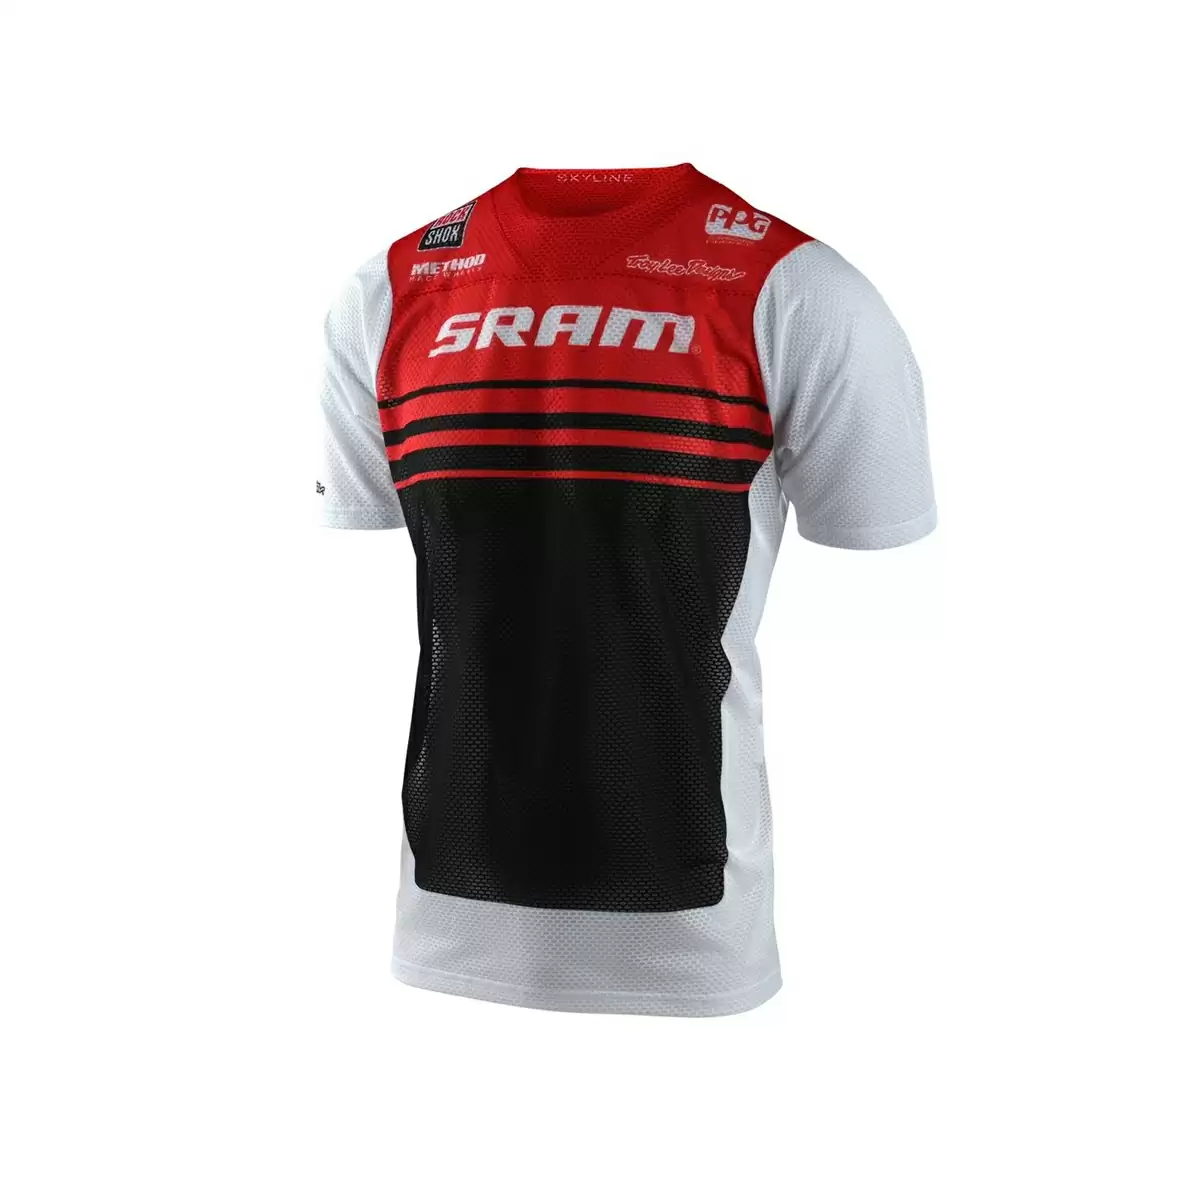 Maillot Skyline Air Sram Short-Sleeve Noir/Rouge Taille S - image